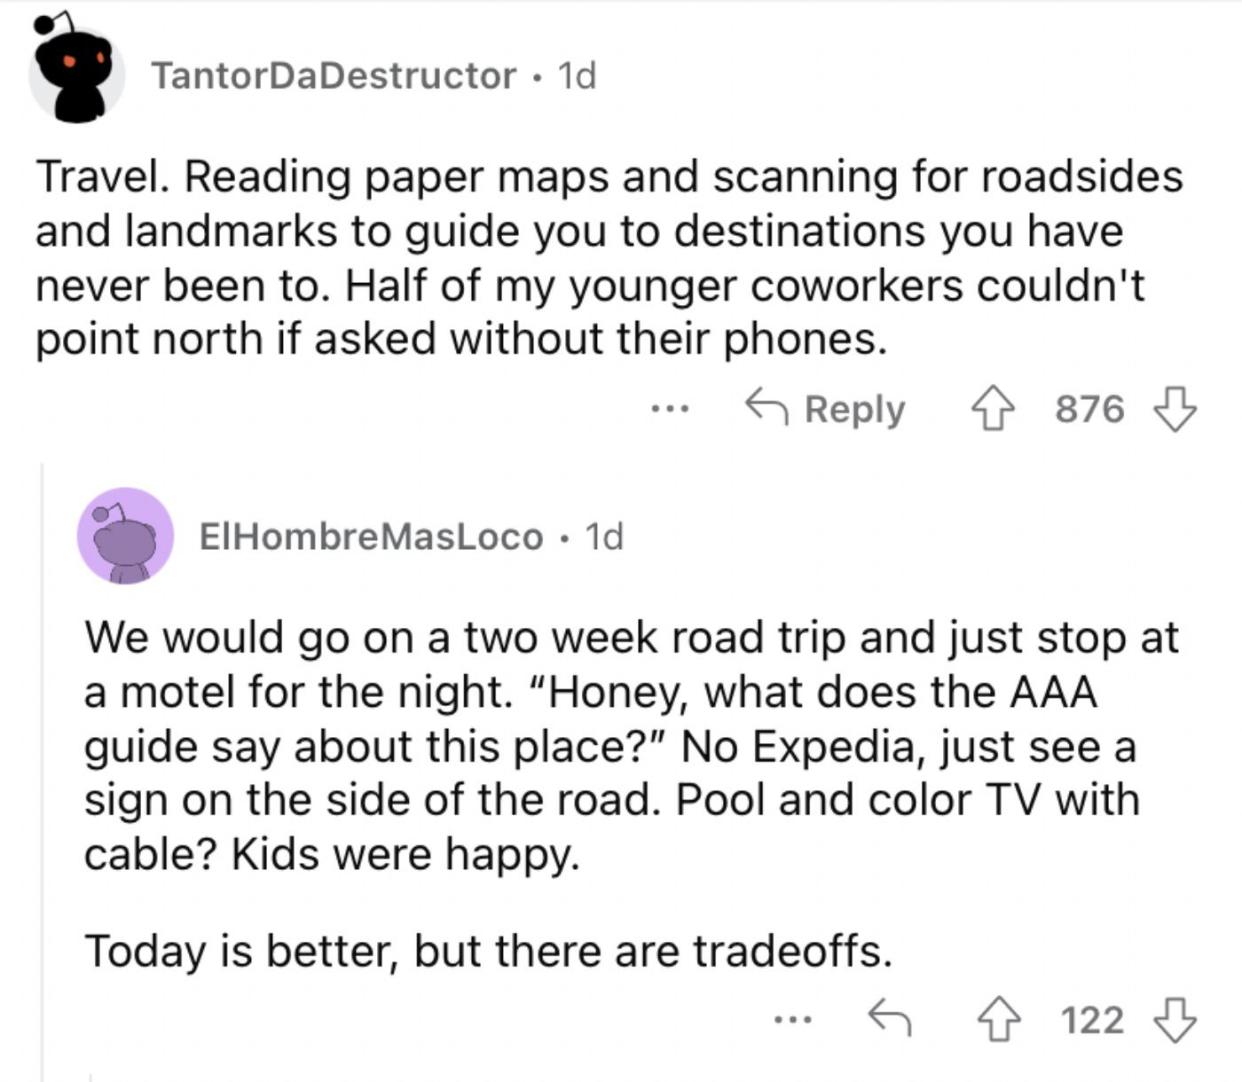 Reddit screenshot about how it's easier to travel nowadays.